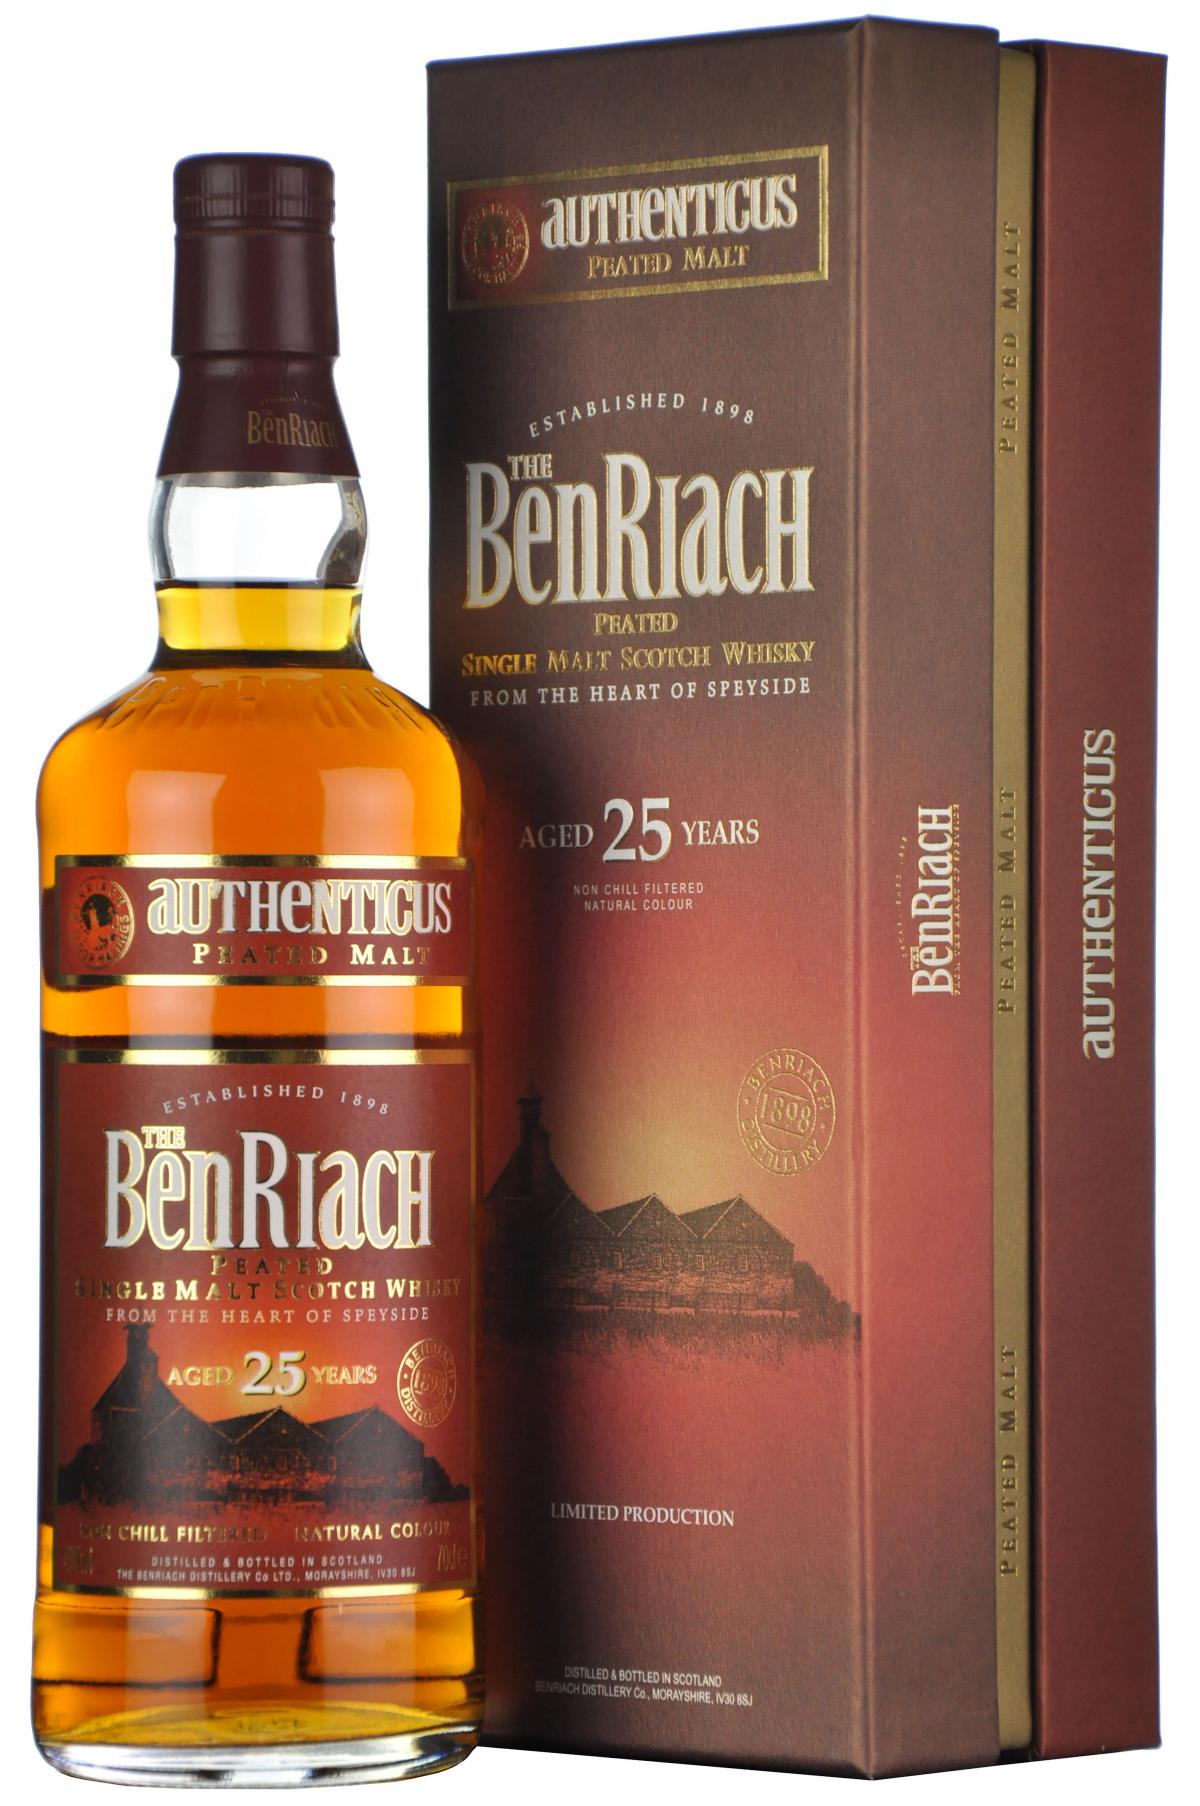 Benriach 25 Year Old | Authenticus Peated